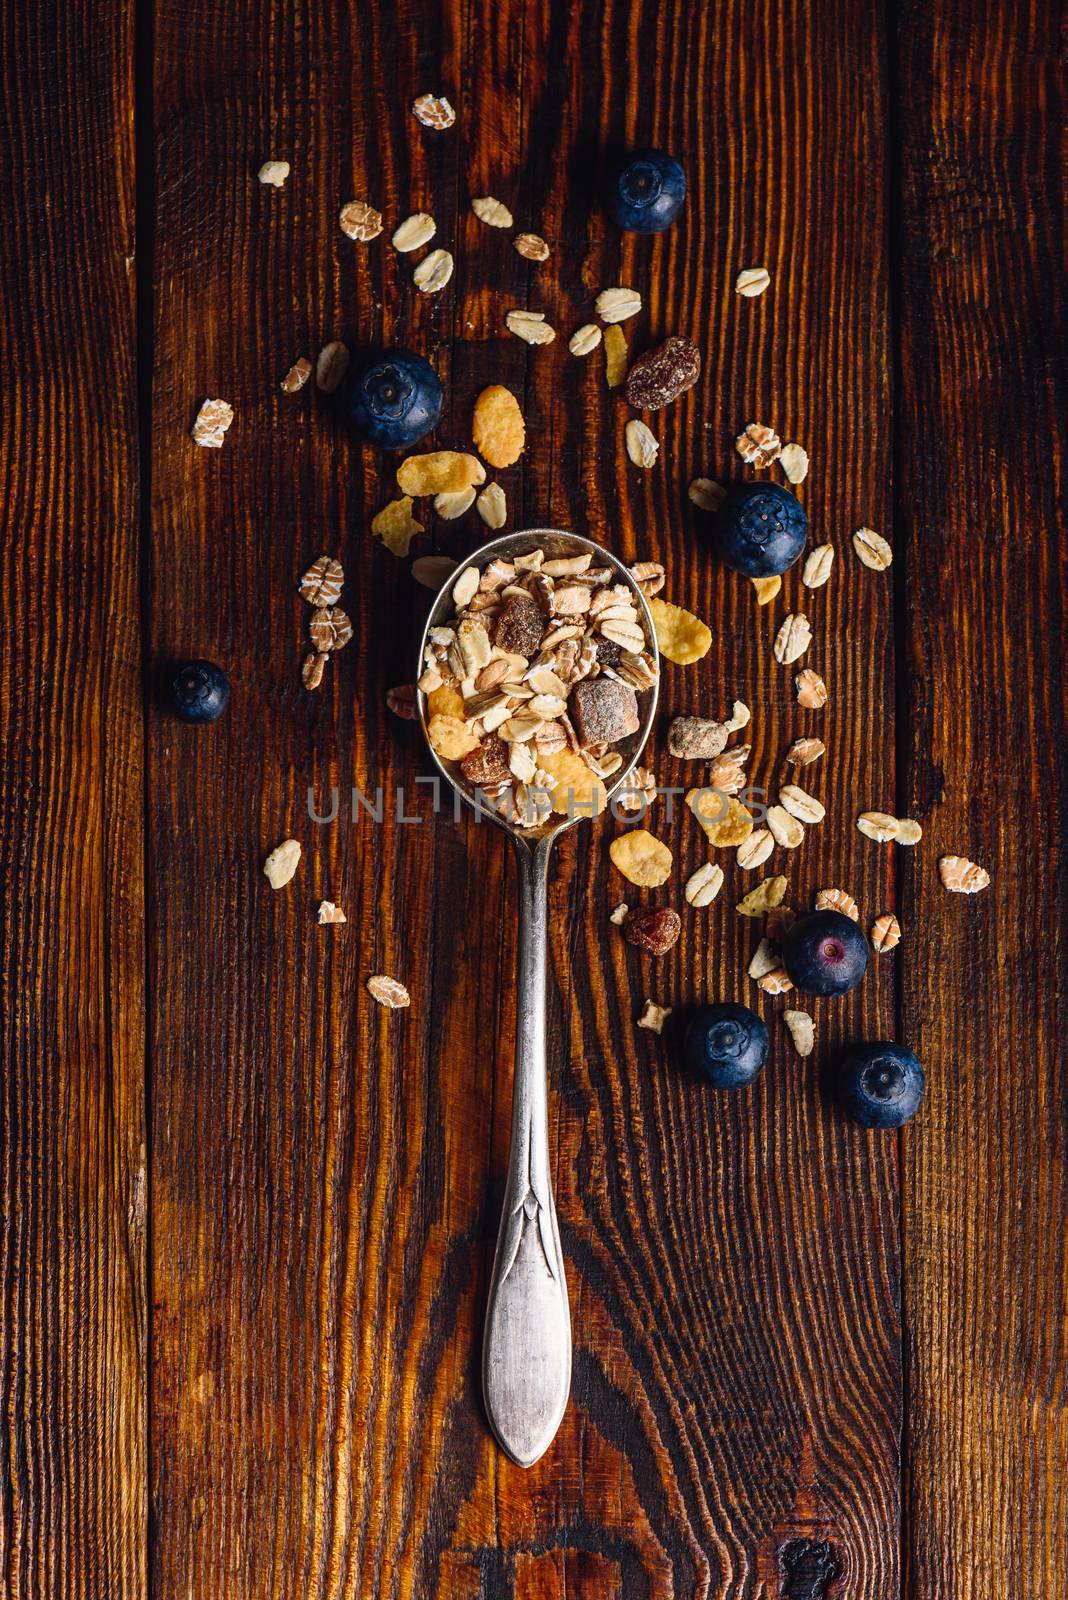 Spoonful of Granola and Blueberry. by Seva_blsv